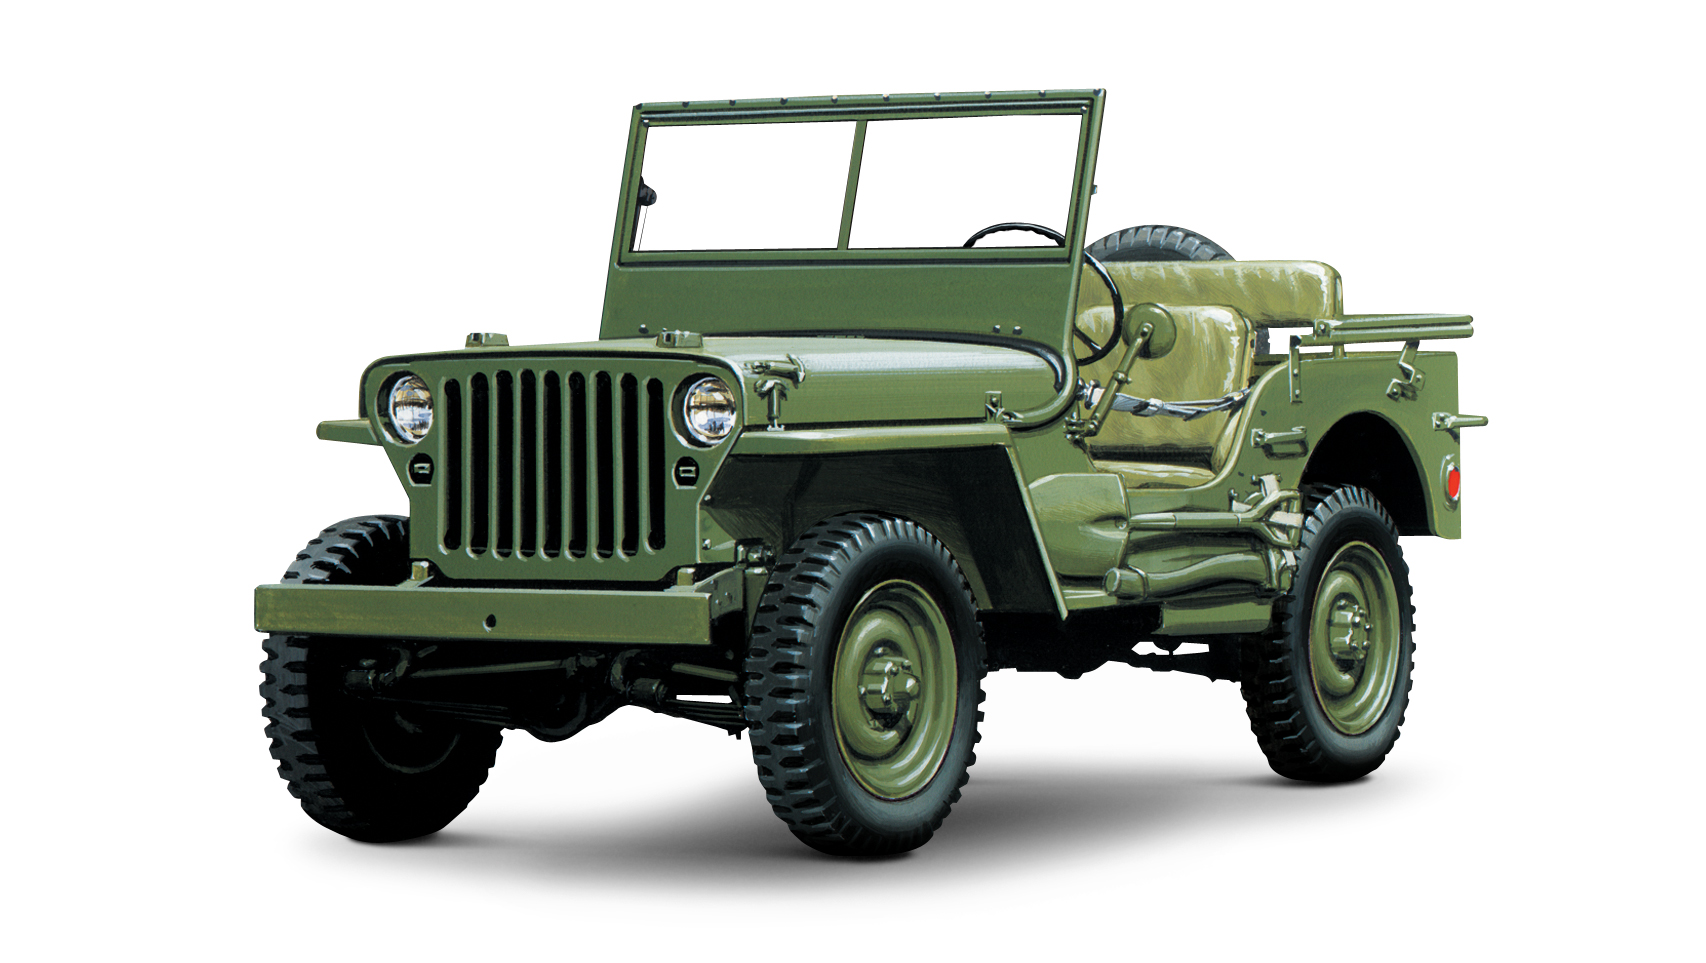 How the military jeep became today's Jeep Wrangler